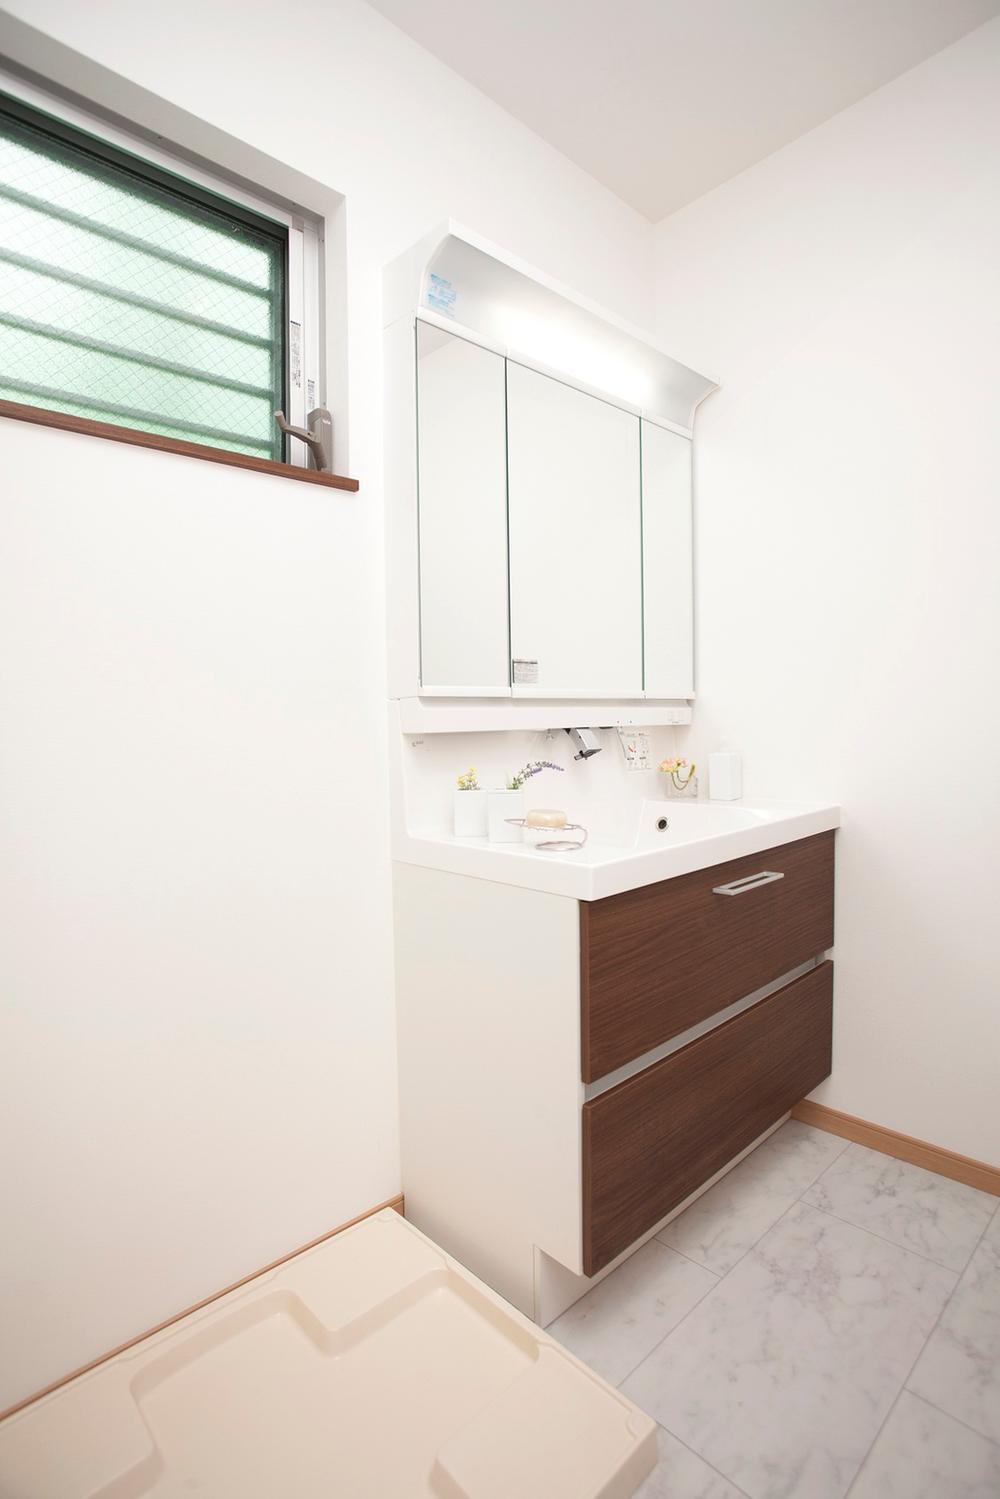 Other Equipment. Bathroom vanity [Erushii] Be clean, Eco, Housed in smart. It was realized in the simple and beautiful design. 